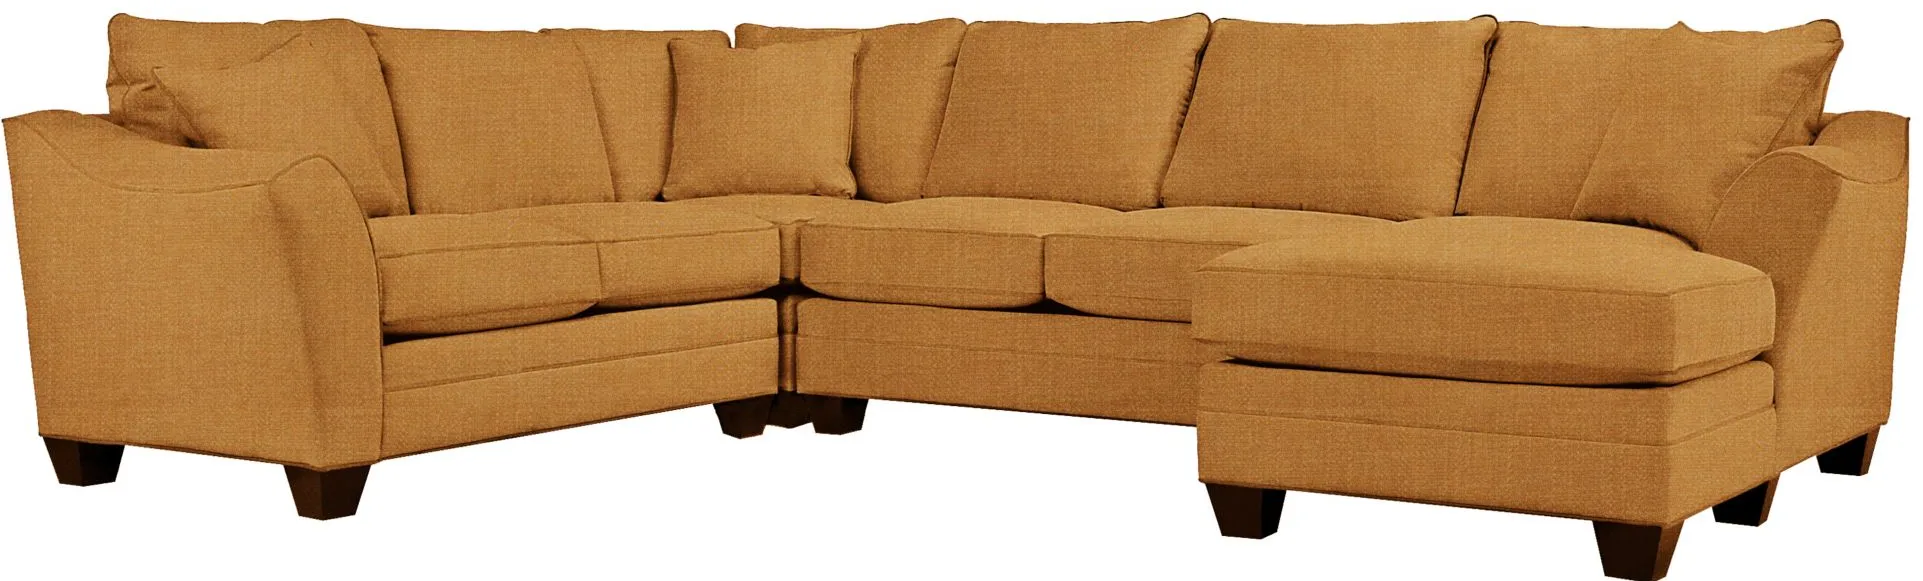 Foresthill 4-pc. Sectional w/ Right Arm Facing Chaise in Elliot Sunflower by H.M. Richards